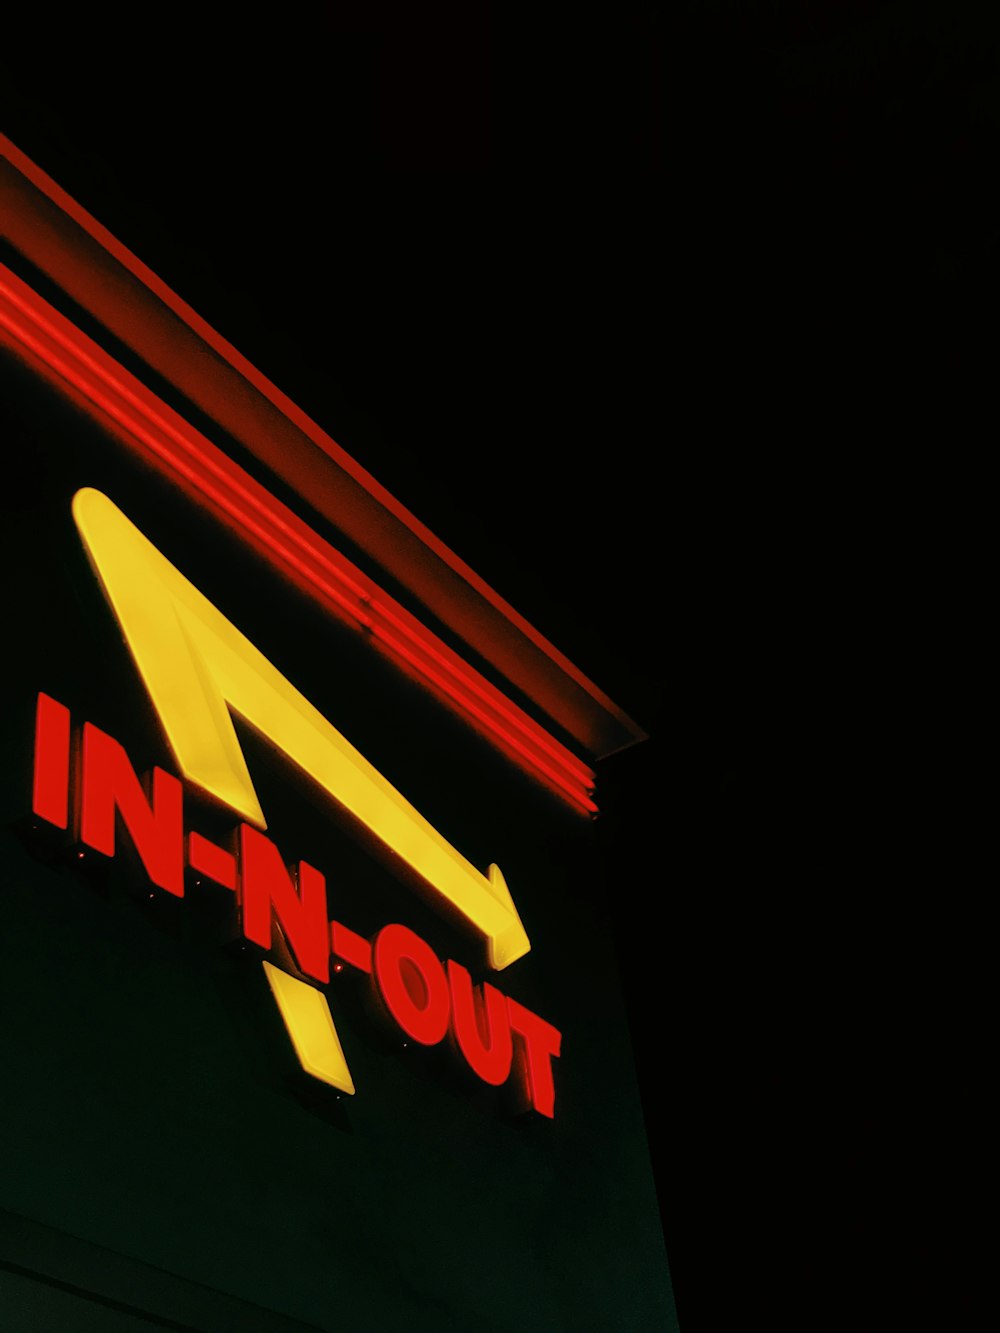 a neon sign that reads in - n - out on the side of a building